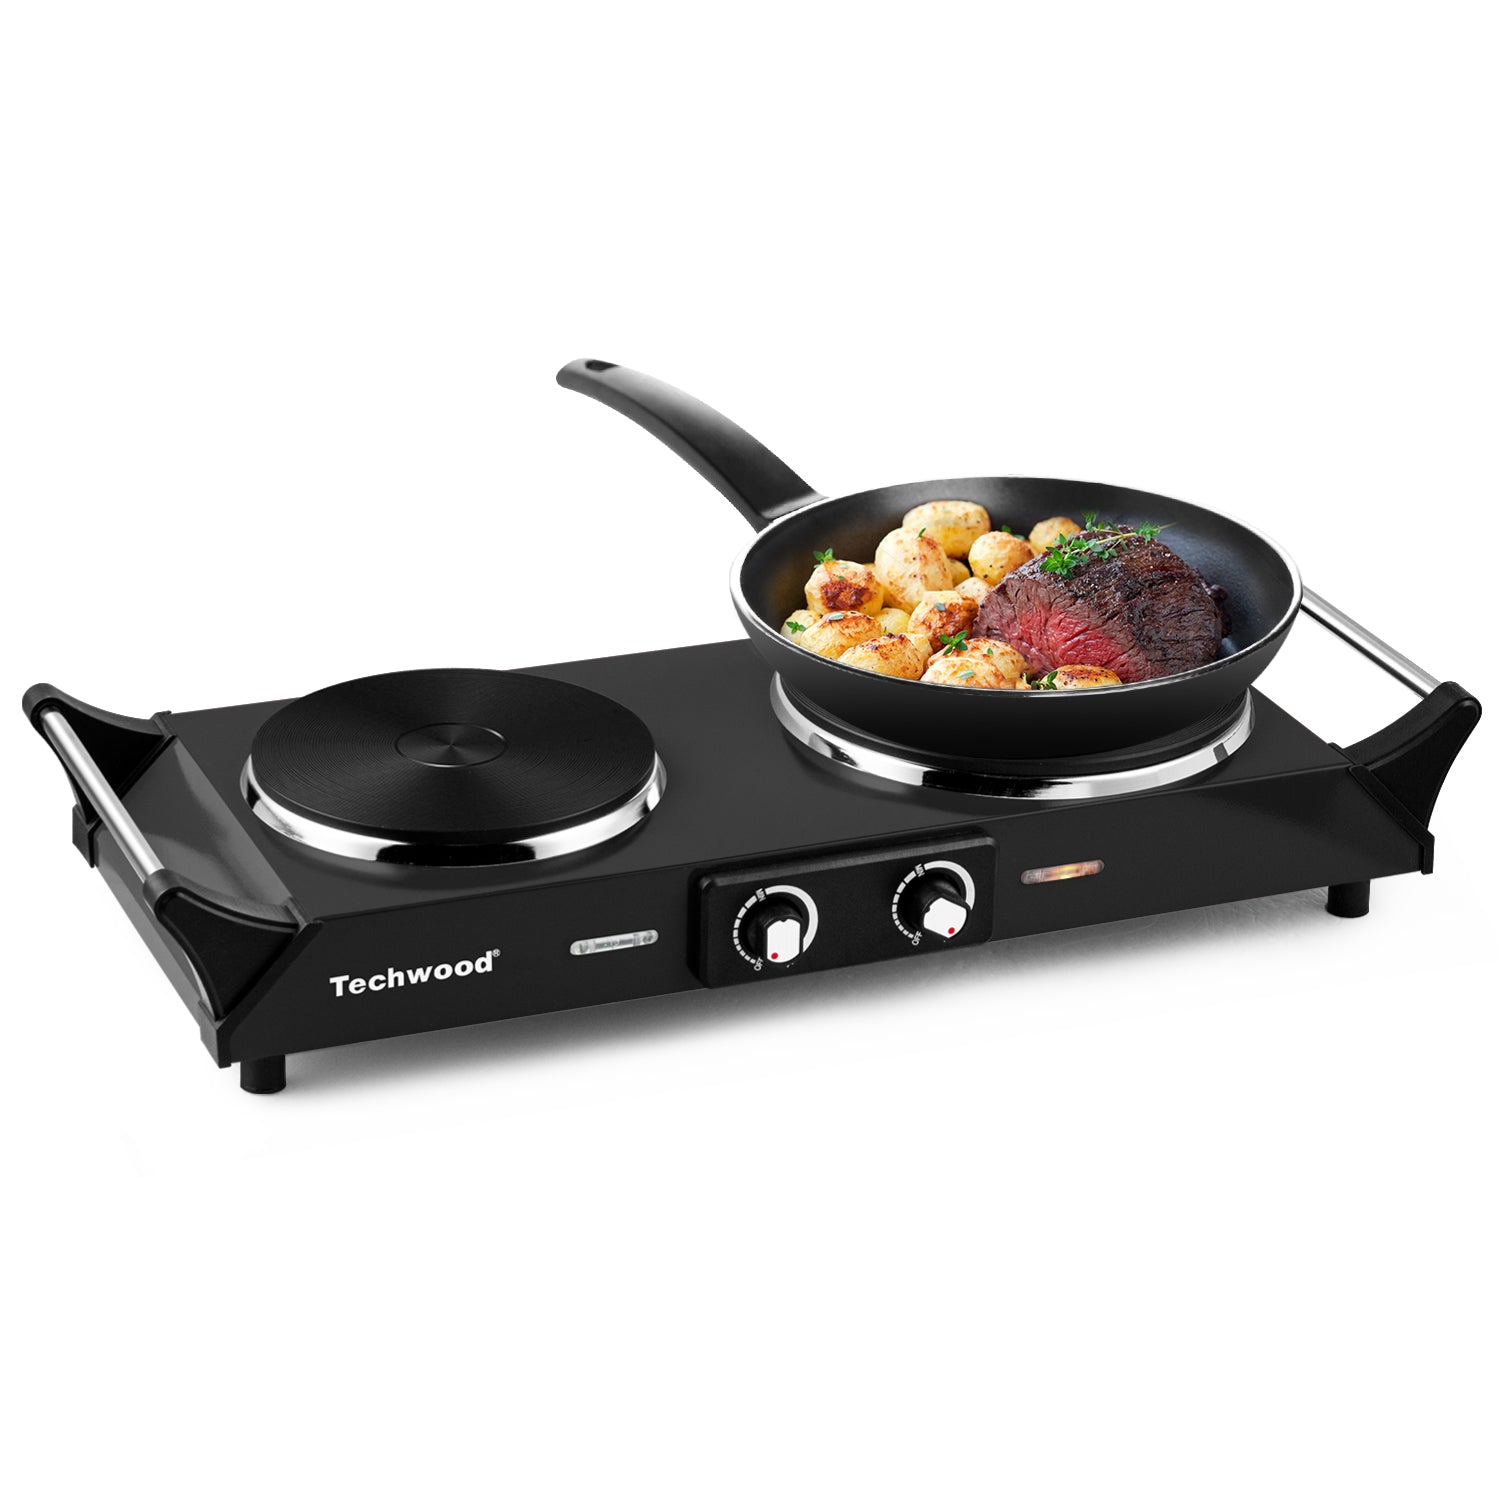 Hot Plate, Techwood 1800W Portable Electric Stove for Cooking Countertop  Dual Burner with Adjustable Temperature & Stay Cool Handles, 7.5” Cooktop  for